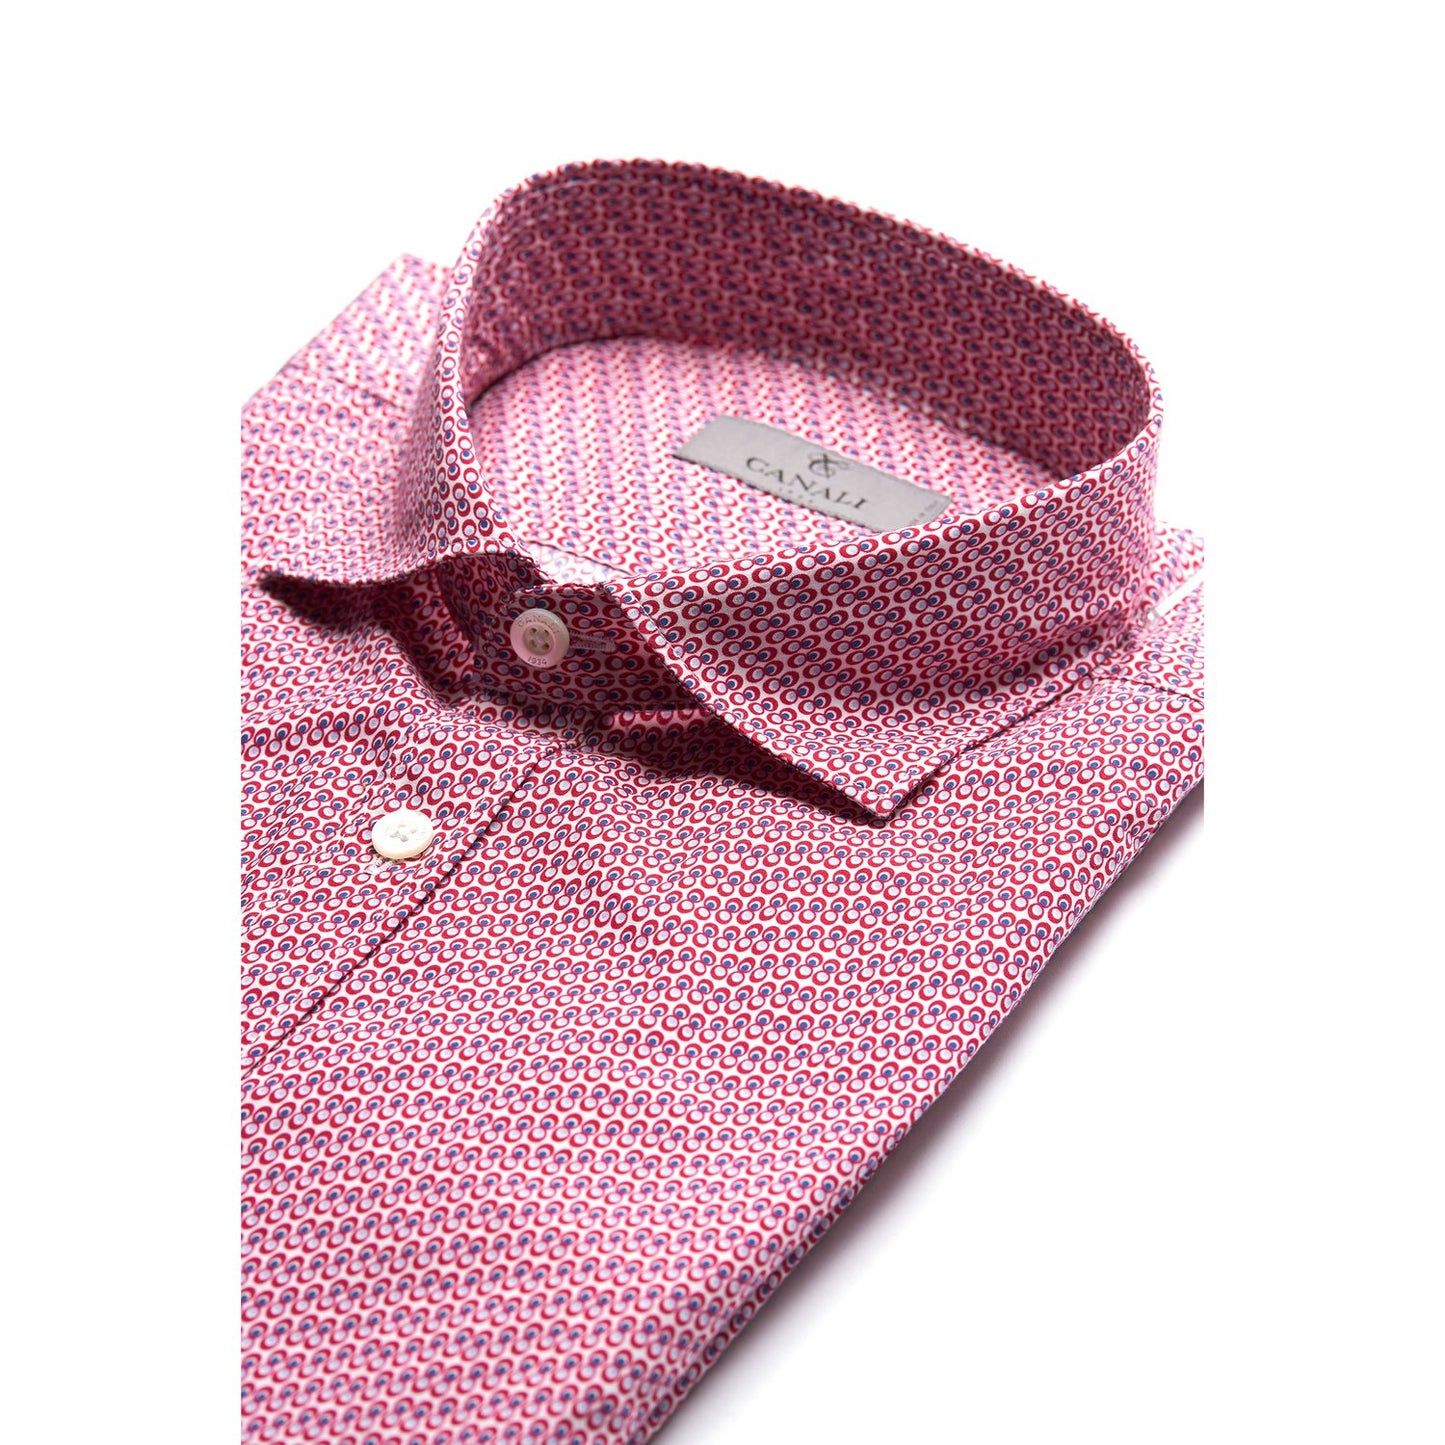 Canali Modern Fit Cotton Sport Shirt in Red with Geometric Pattern